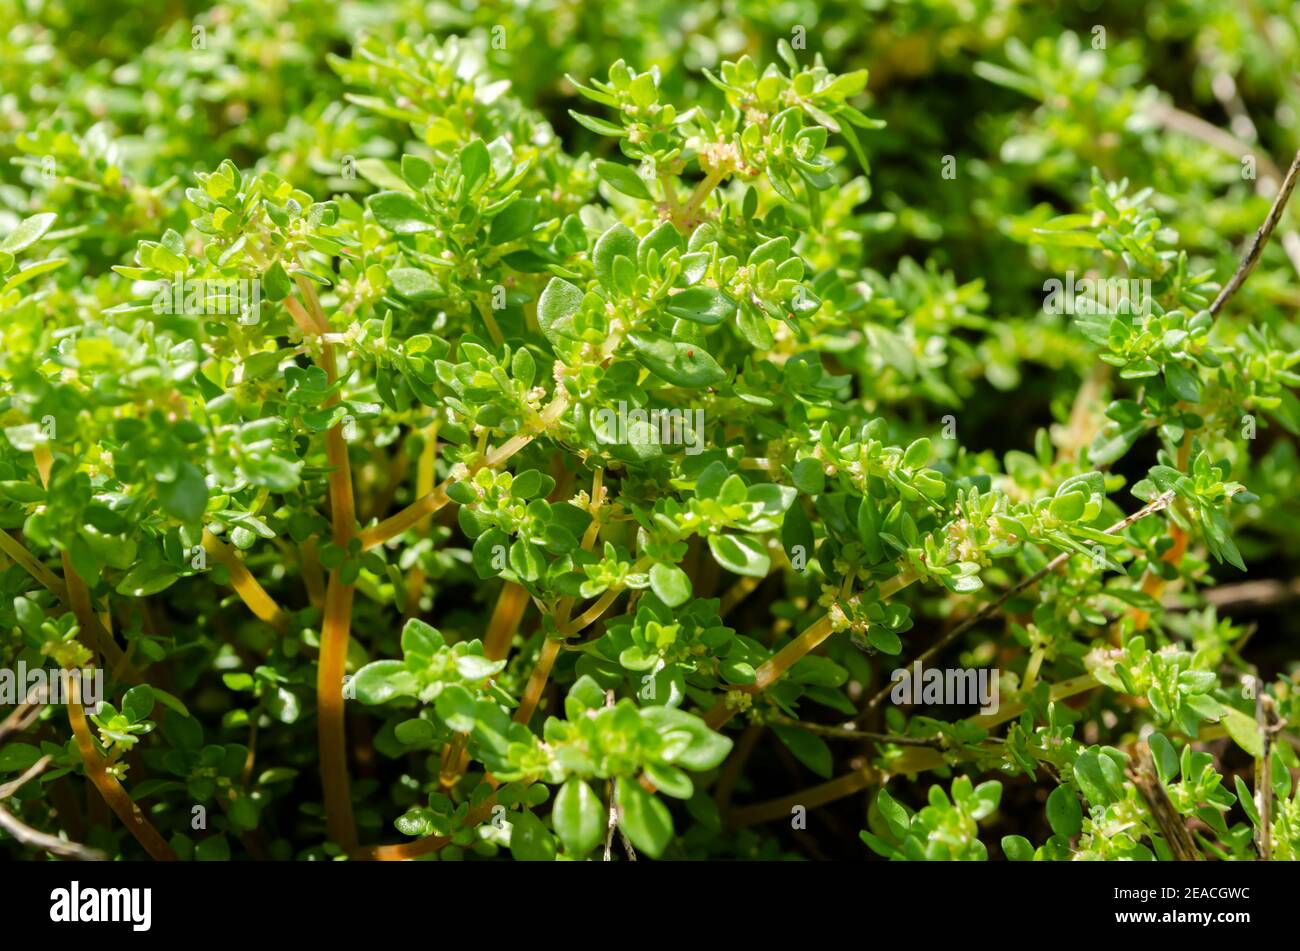 Stems And Branches Of Growing Pilea Microphylla Plant Stock Photo